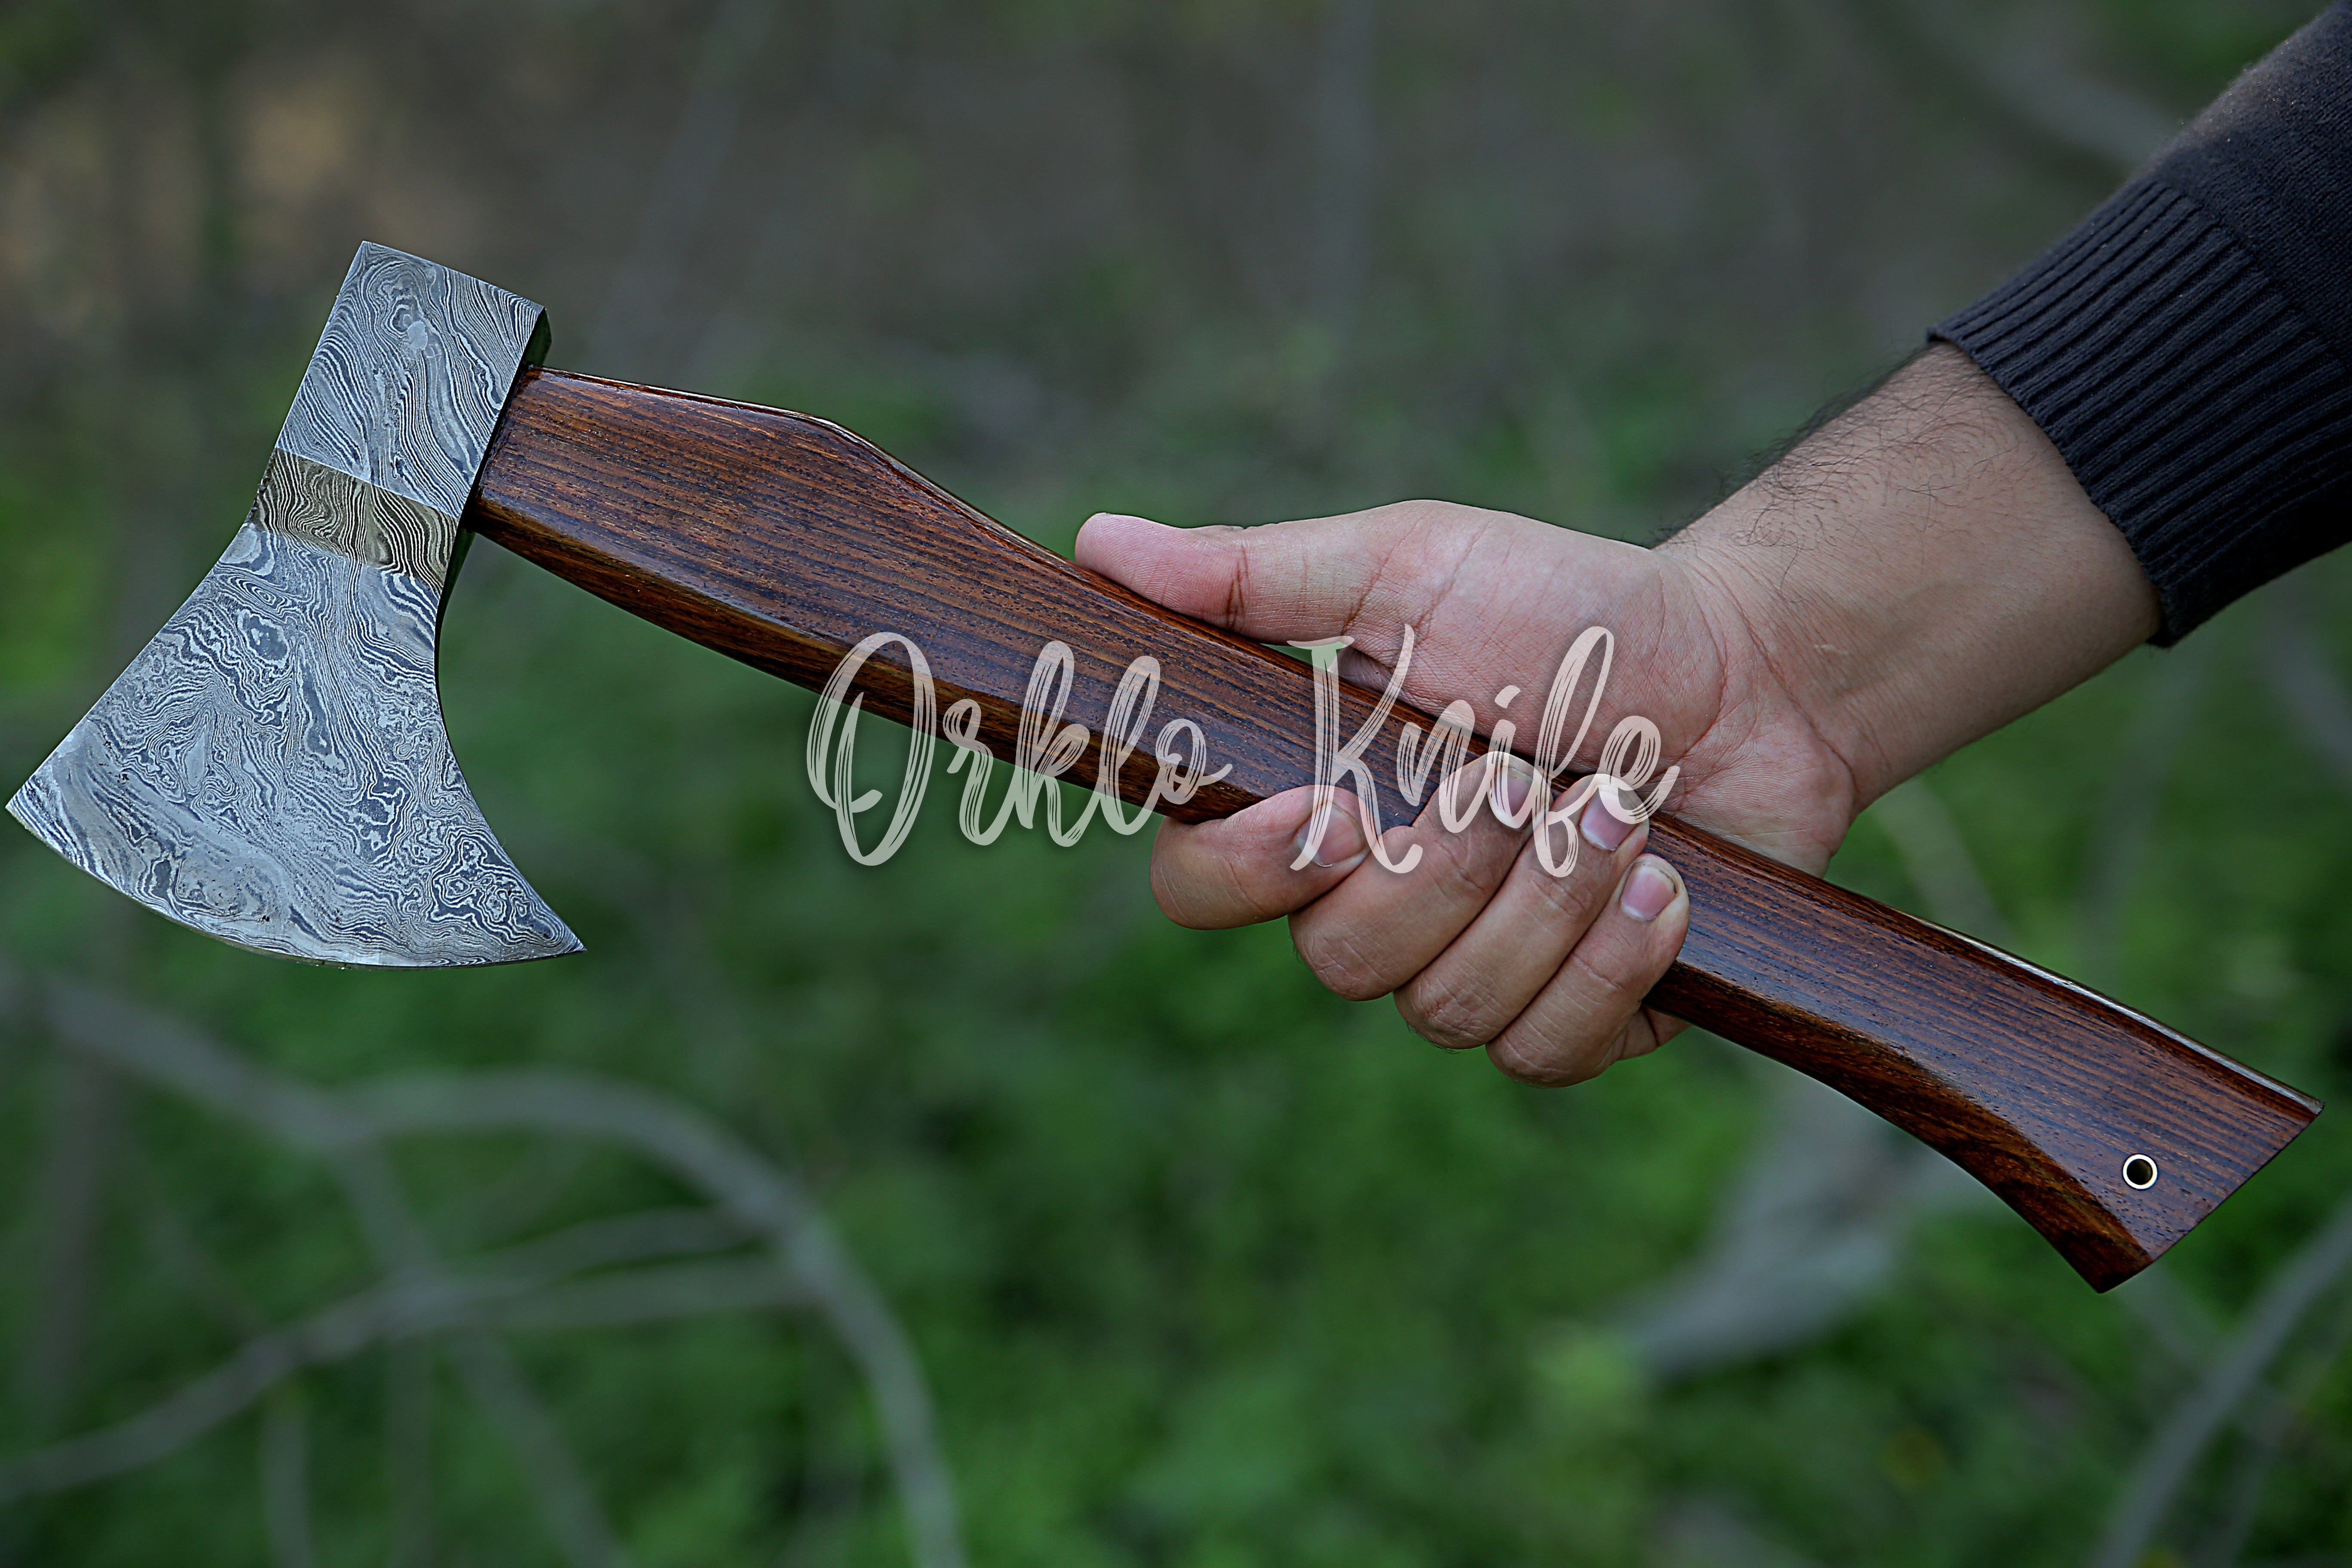 Damascus steel axe with pouch - Orkloknife